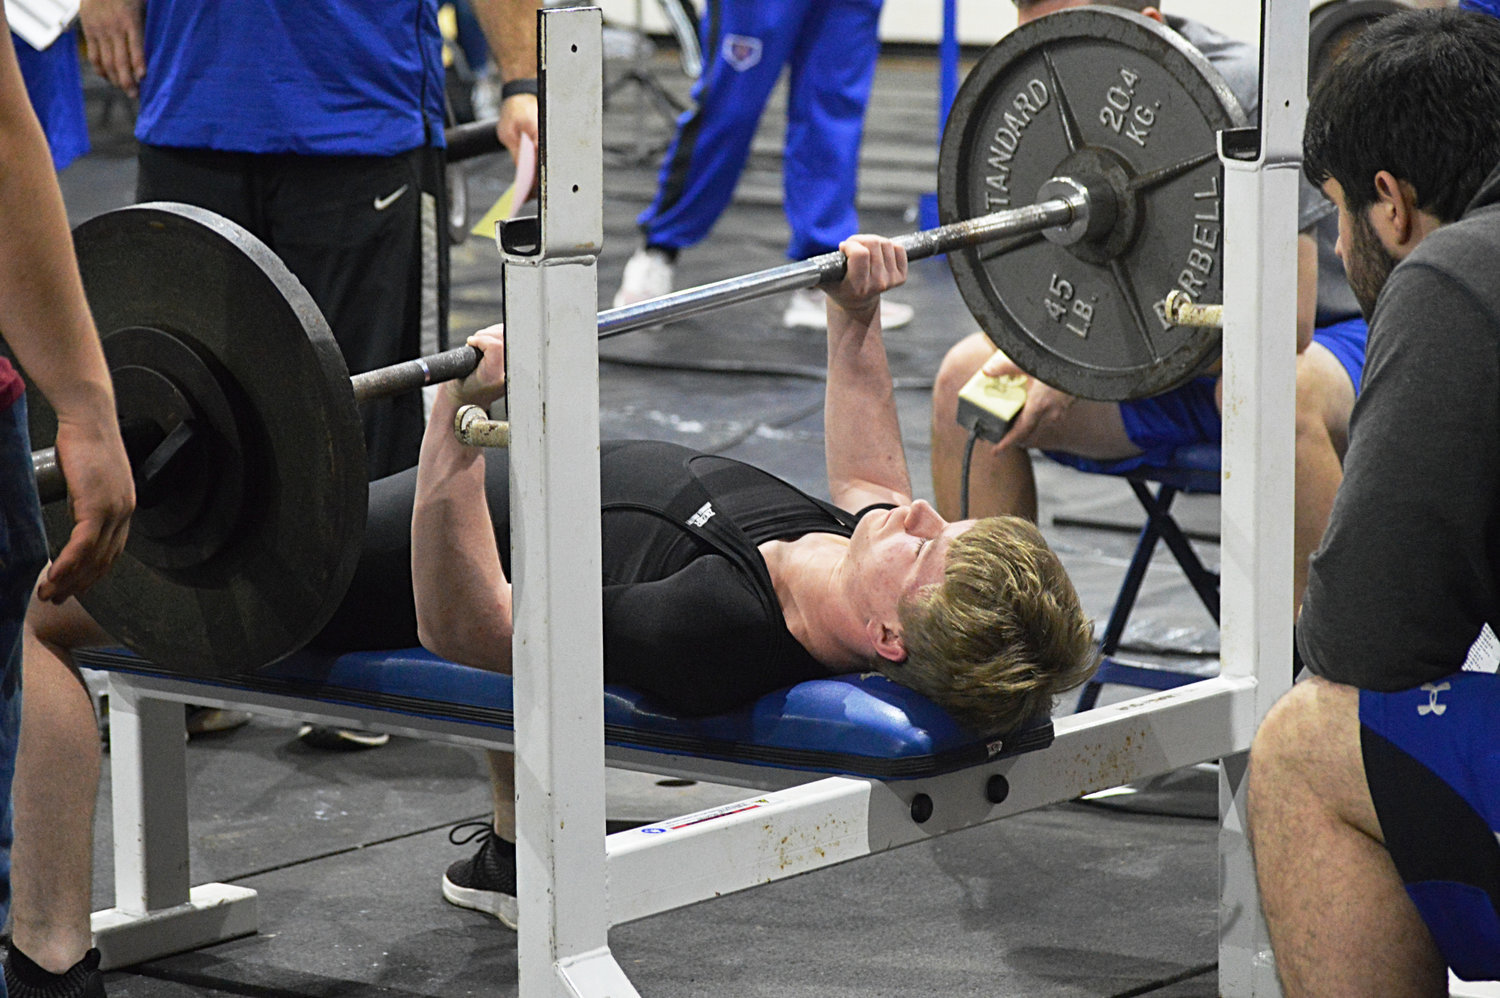 Quitman High School sophomore Bryan Morris performs the bench press during the boys power lifting competition Saturday in Quitman.